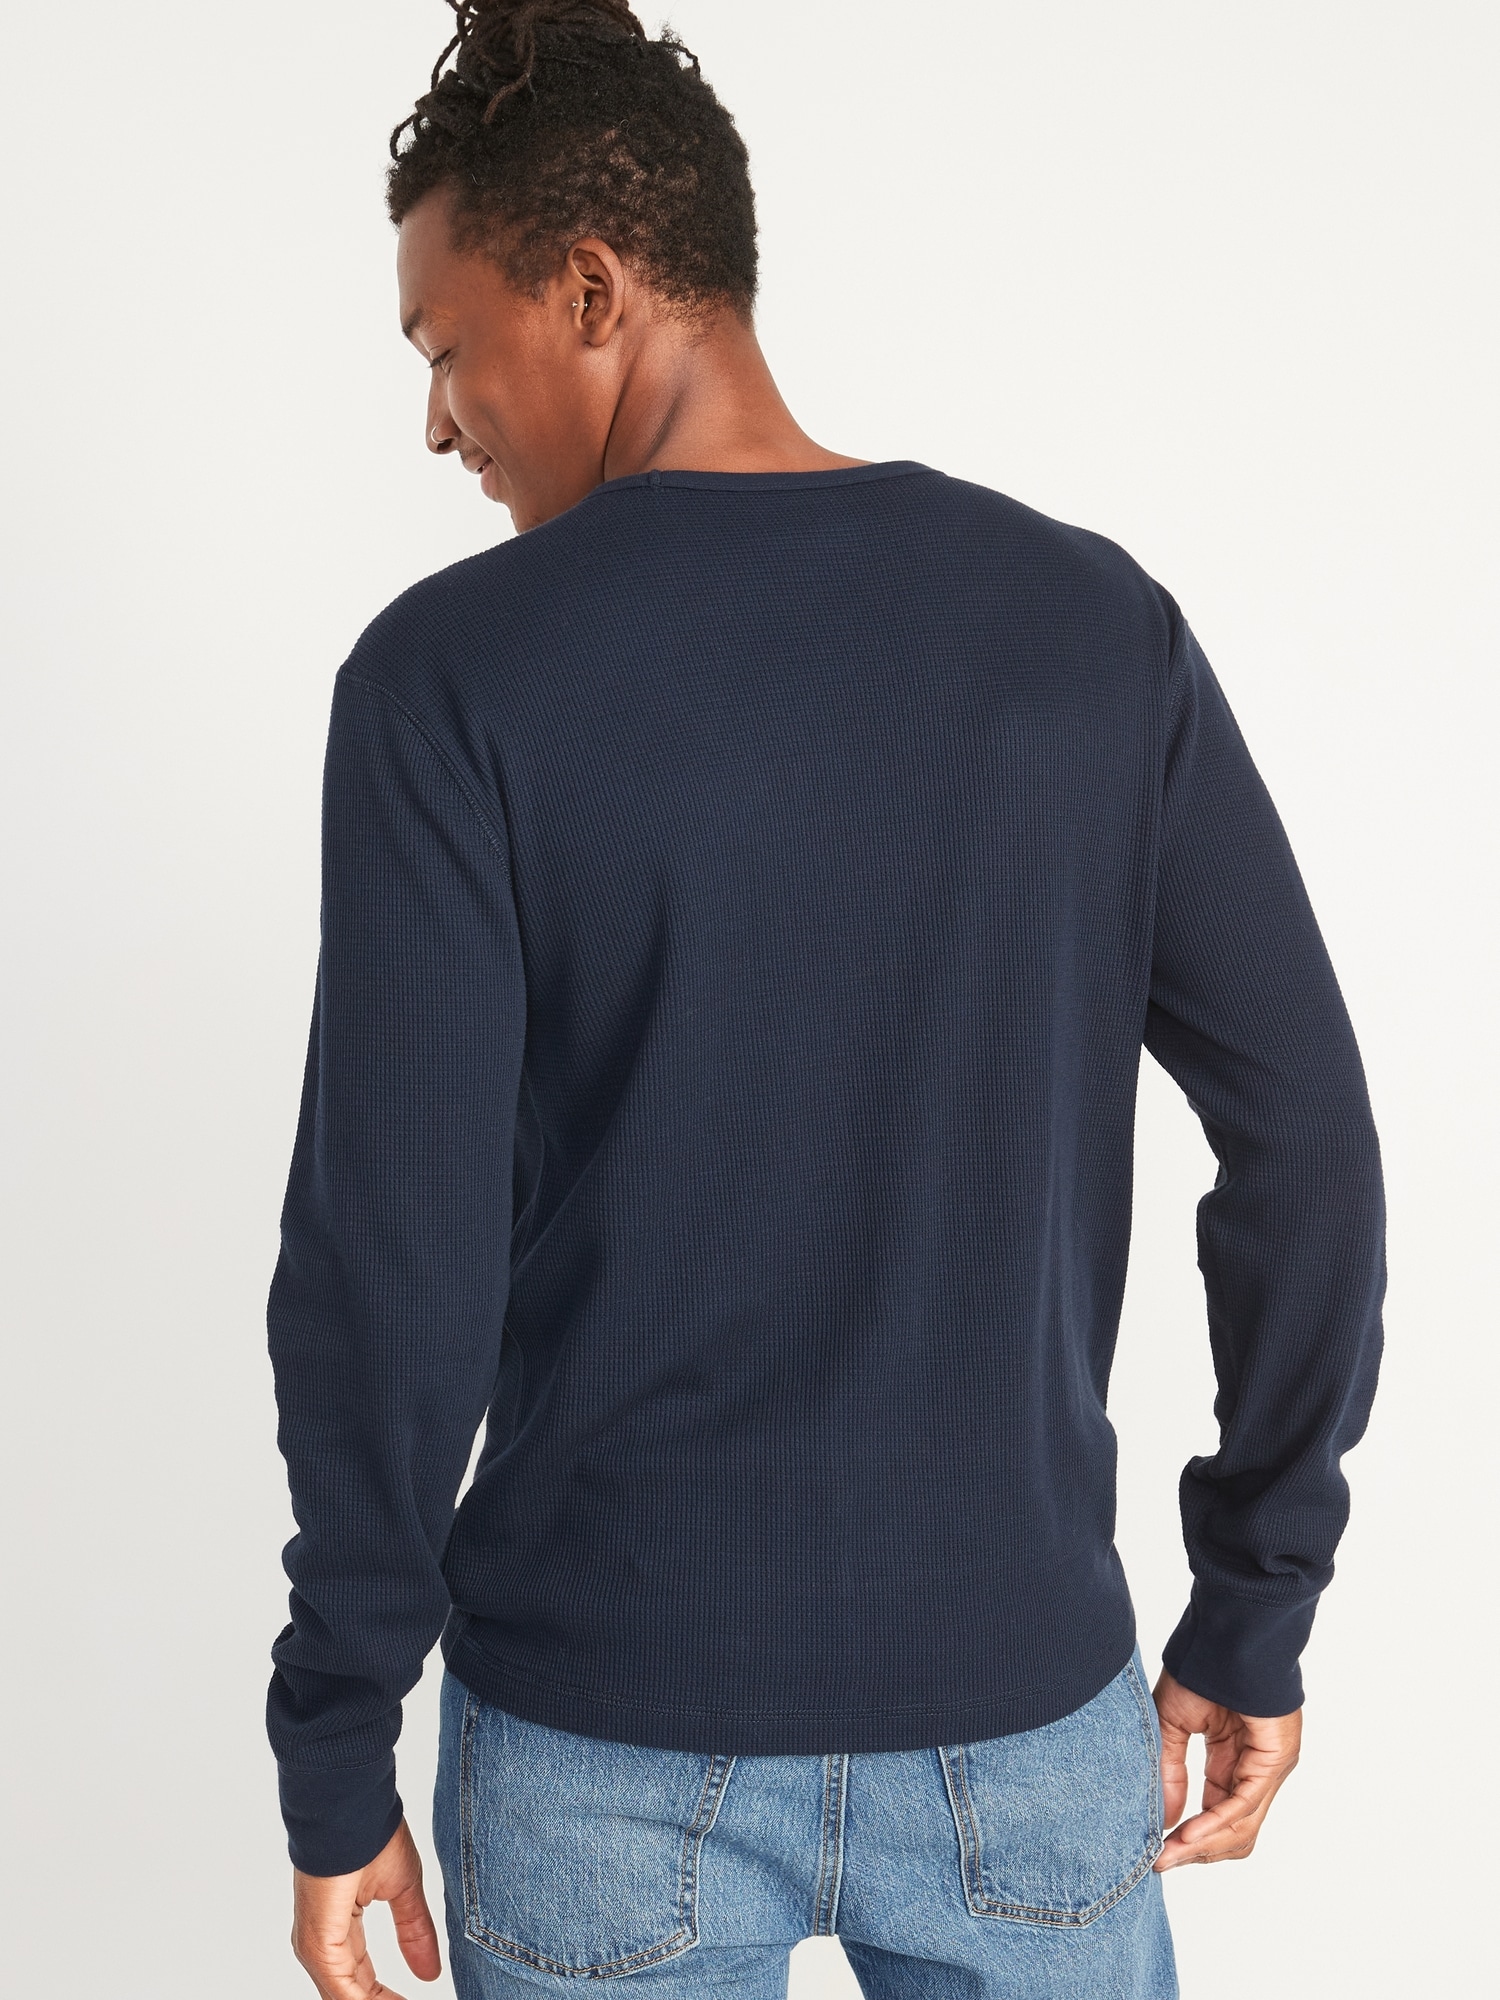 Graphic Thermal-Knit Long-Sleeve T-Shirt for Men | Old Navy